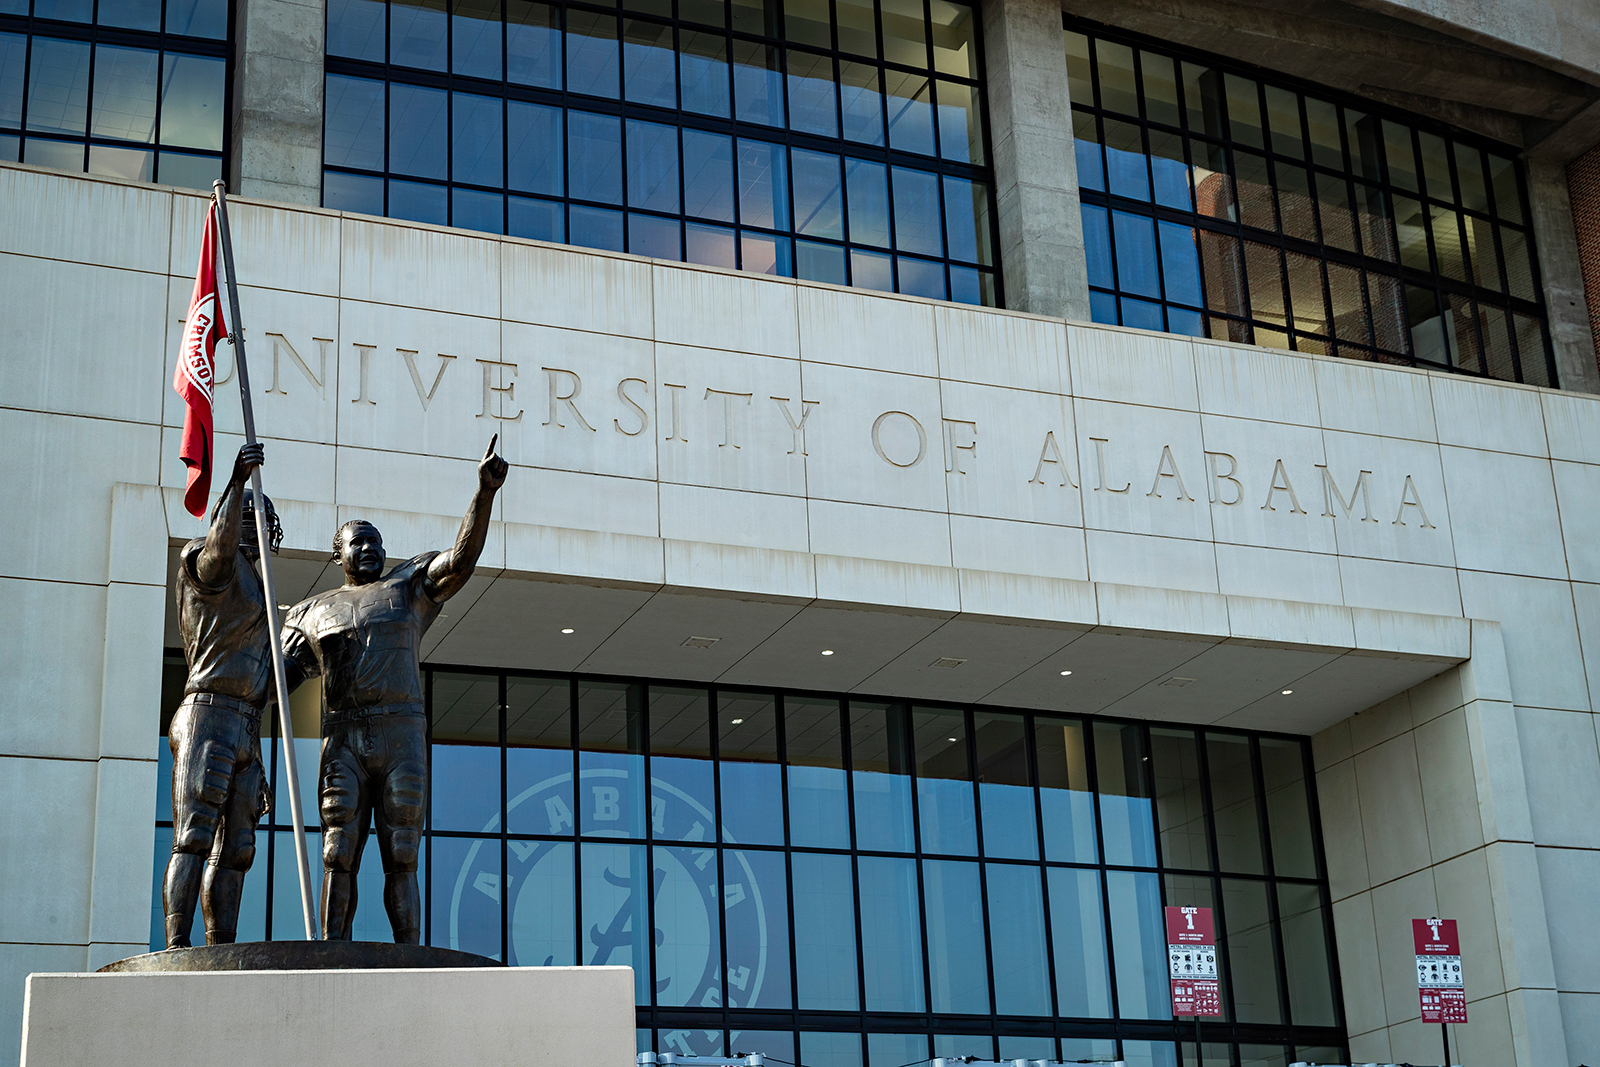 A statue outside of Bryant-Denny Stadium on the campus of the University of Alabama  in Tuscaloosa, Alabama.